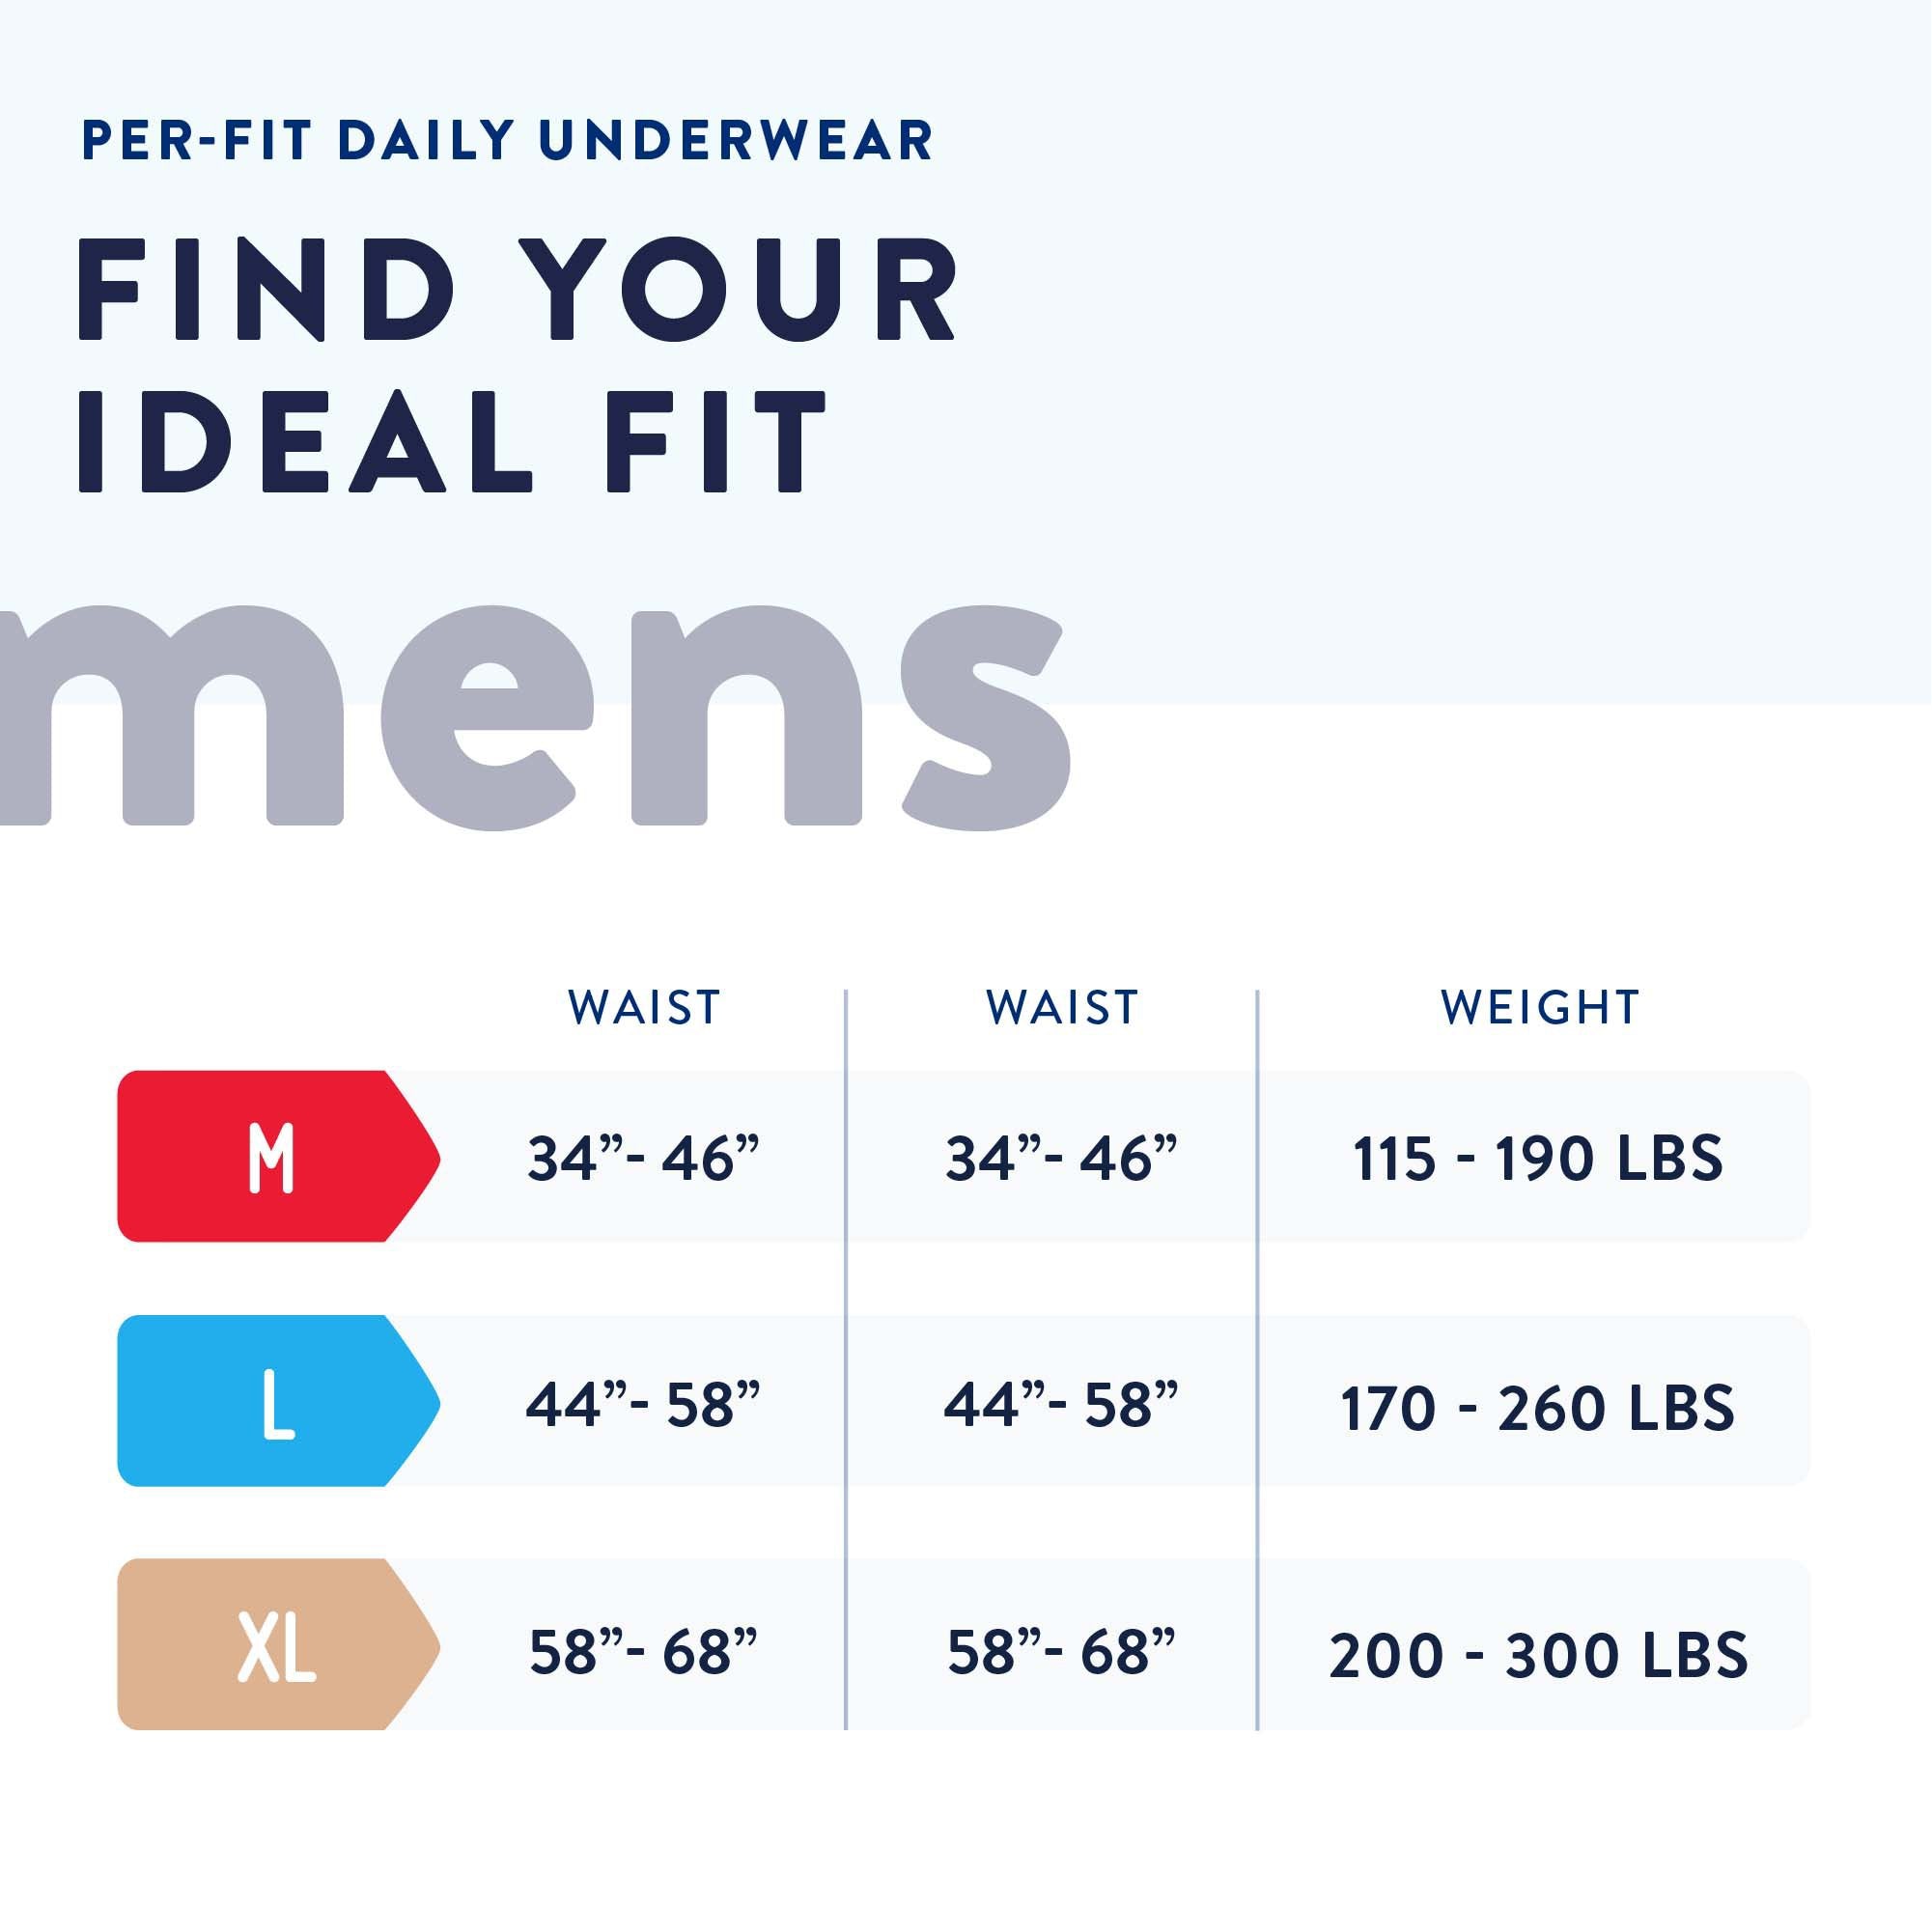 Male Adult Absorbent Underwear Prevail Per-Fit Men Pull On with Tear Away Seams Large Disposable Moderate Absorbency